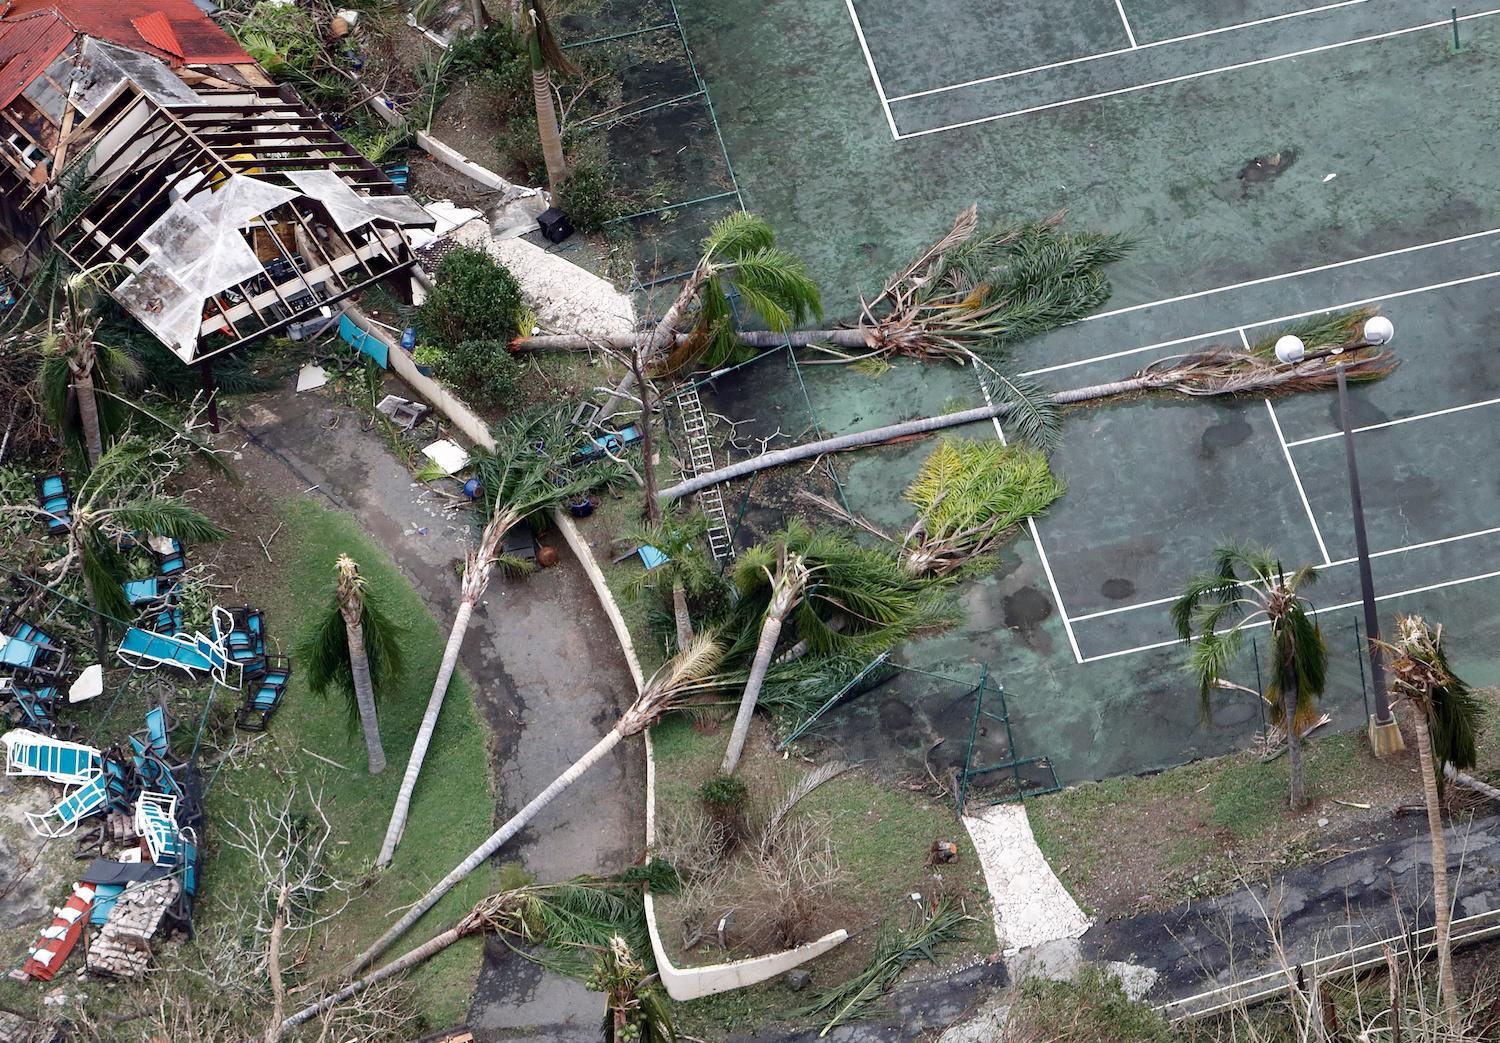 One of the scenes on Sept. 21, 2017, after Hurricane Maria battered St. Croix, one of the US Virgin Islands.